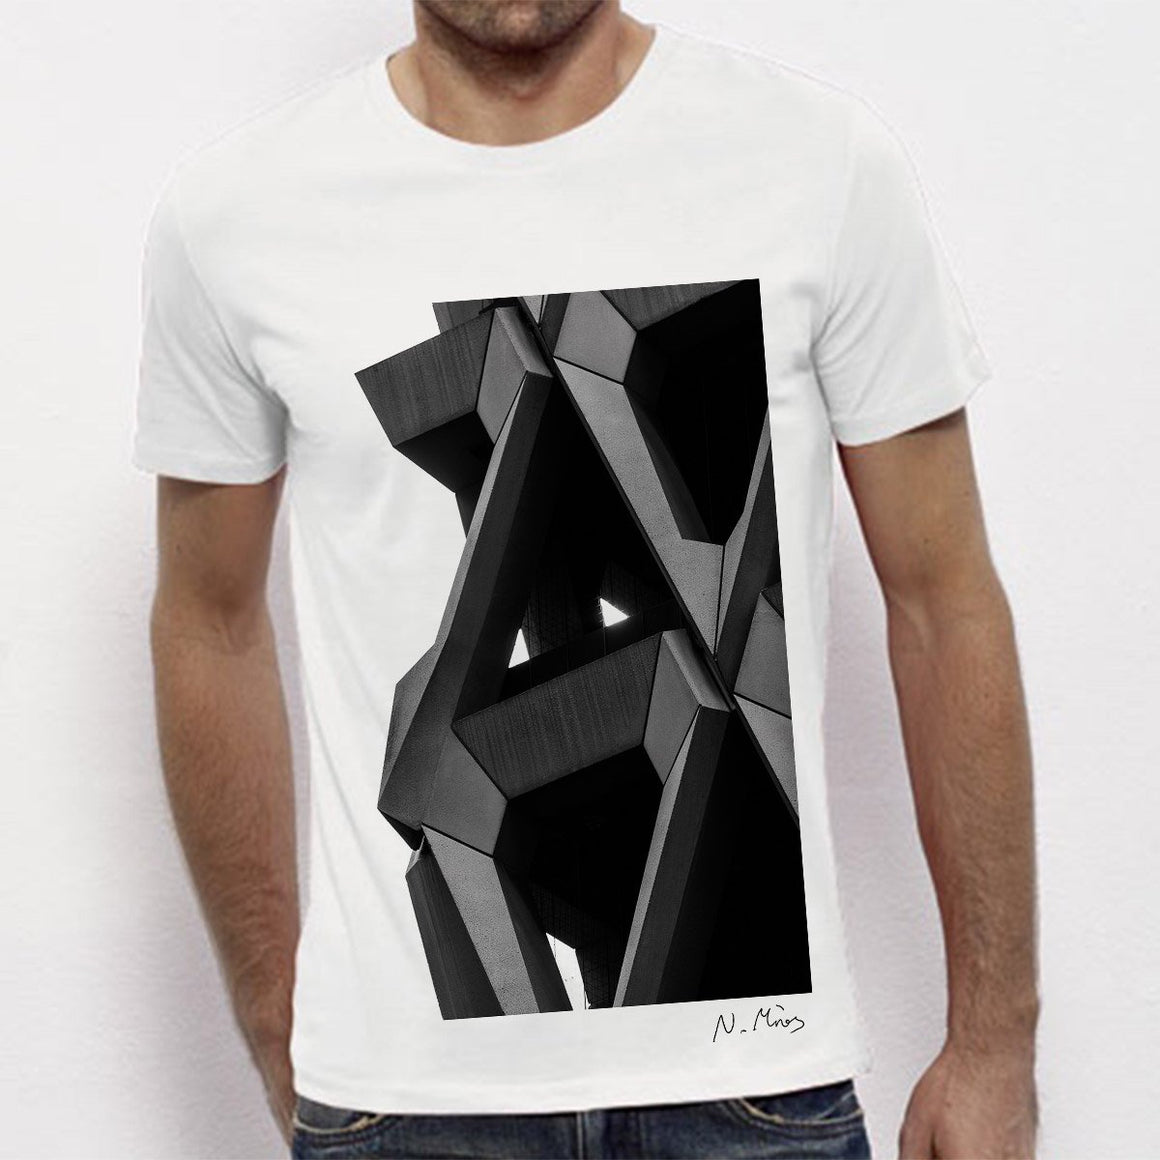 Welbeck Architect's T-Shirt by Nick Miners